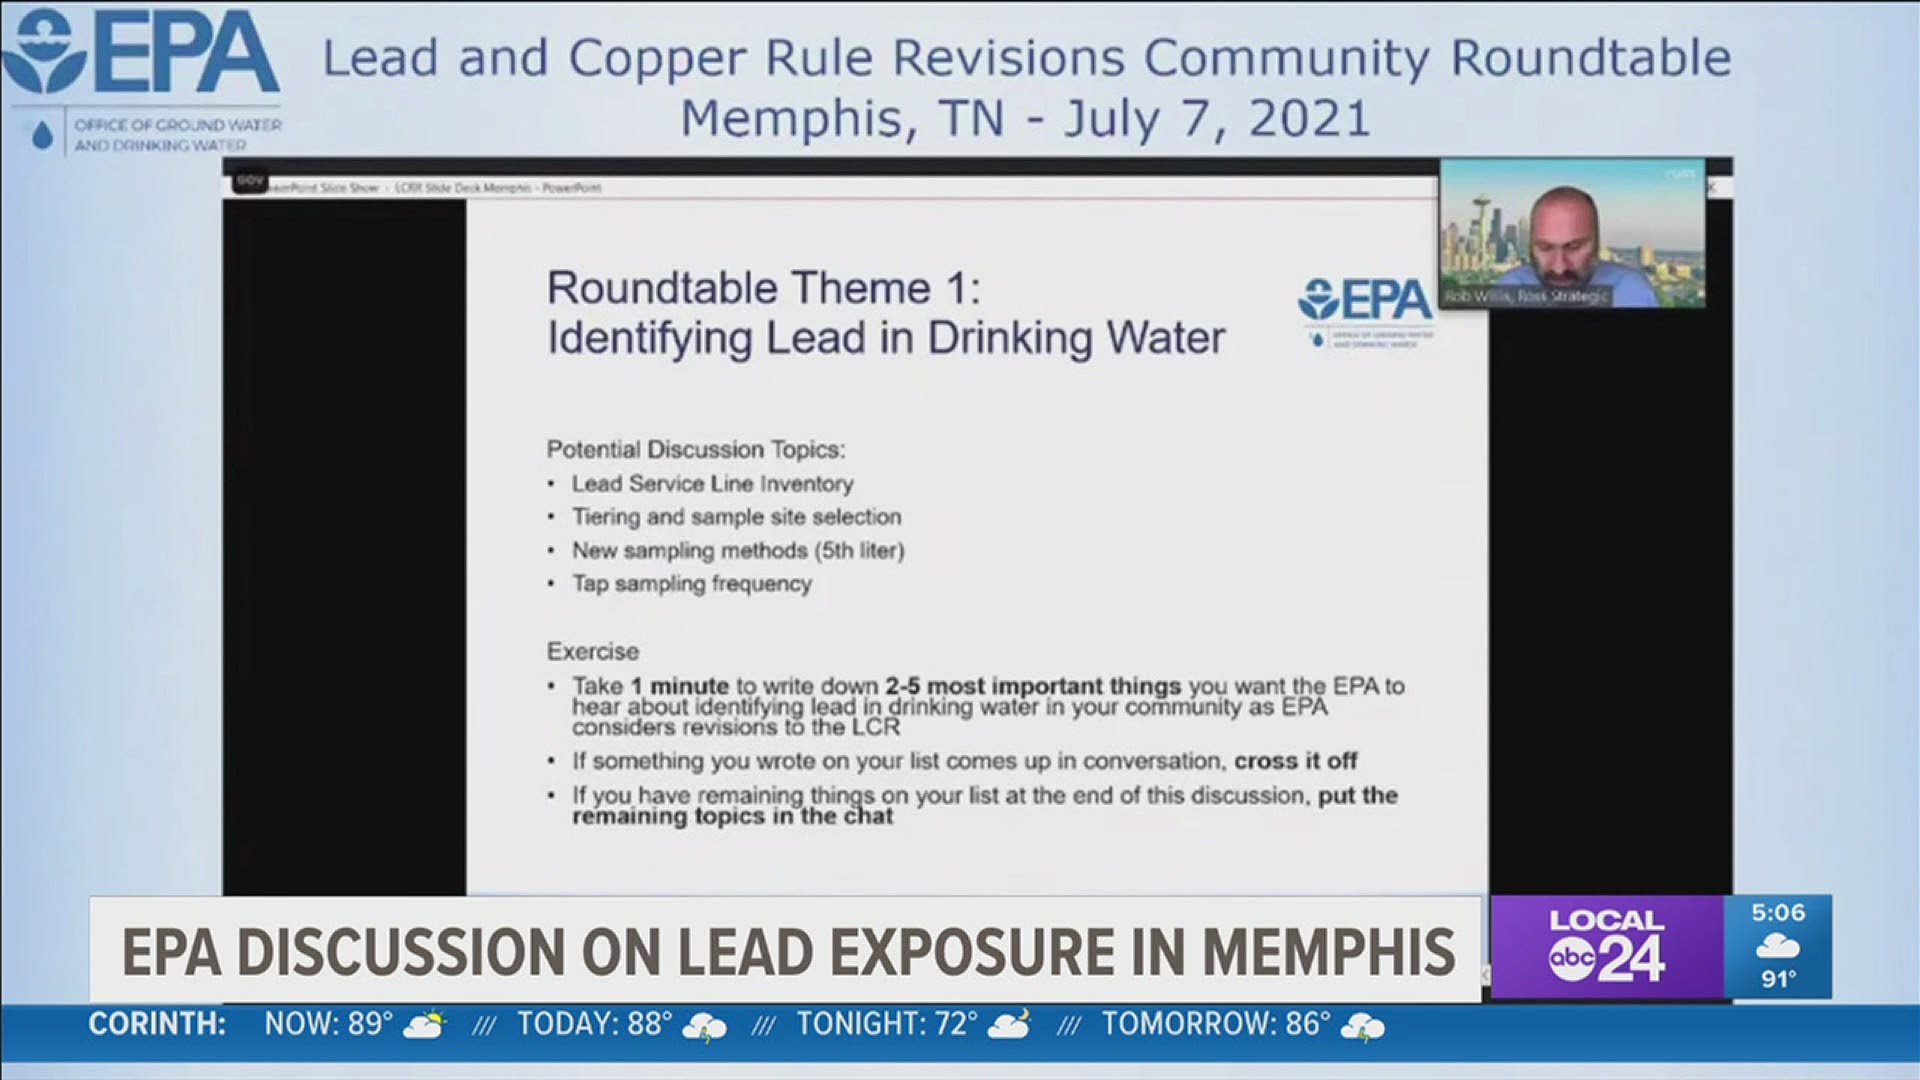 A roundtable was held this week where federal leaders provided information about the revisions to the lead and copper rule.